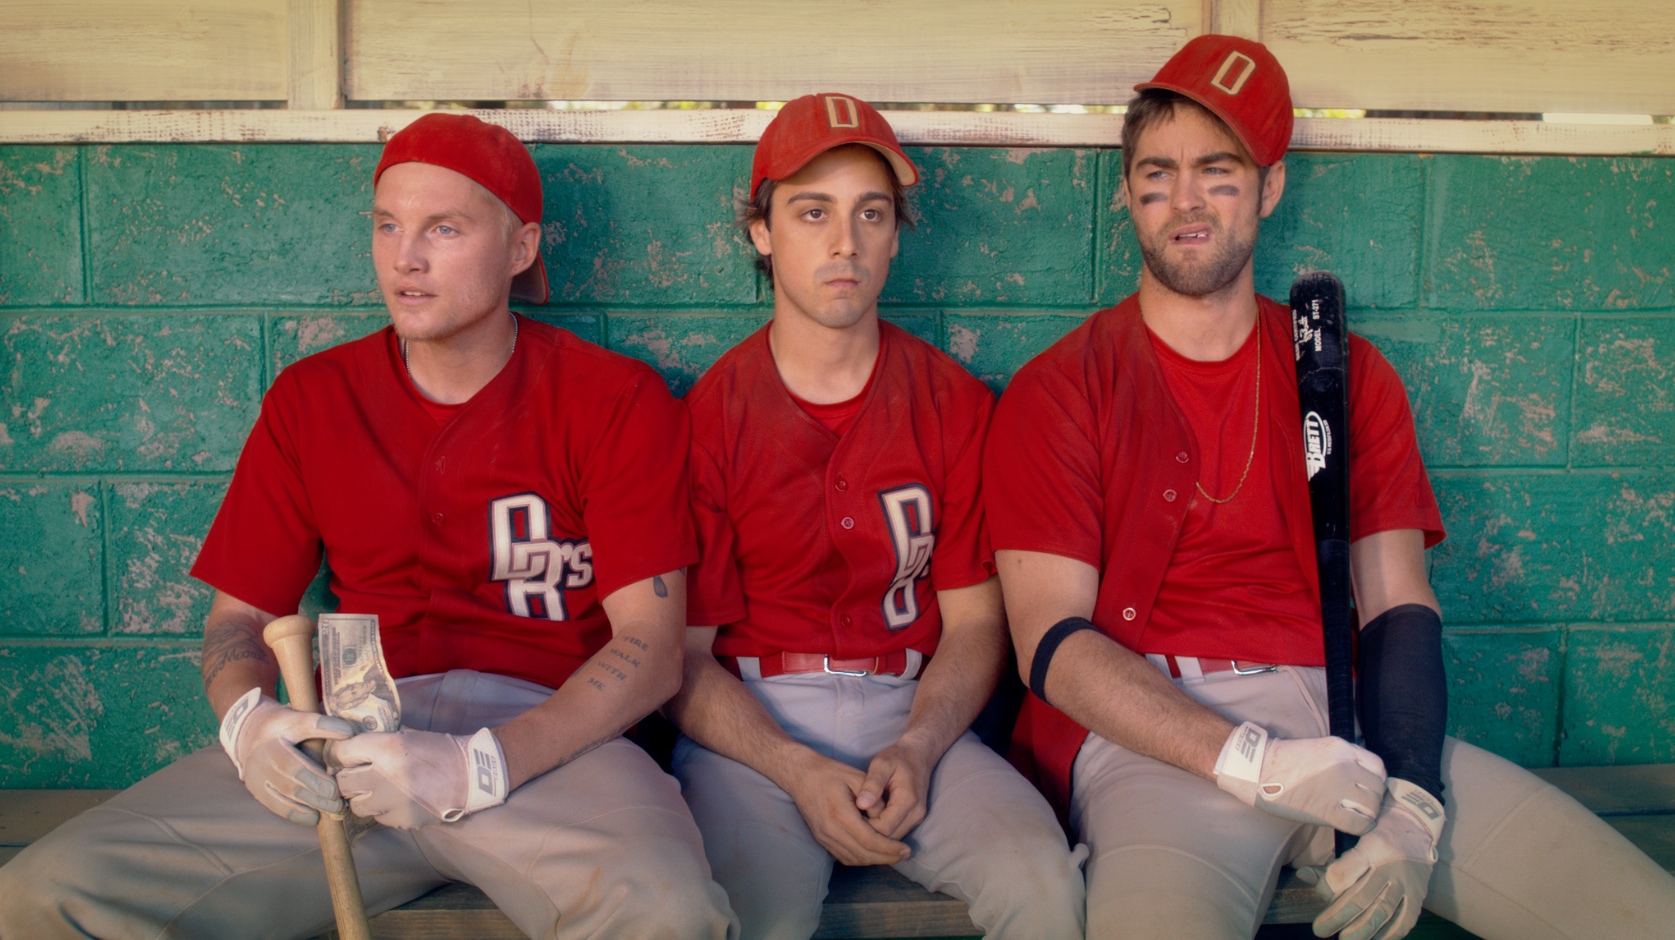 Toby Hemingway, Matt Bush, and Chace Crawford in Undrafted (2016)